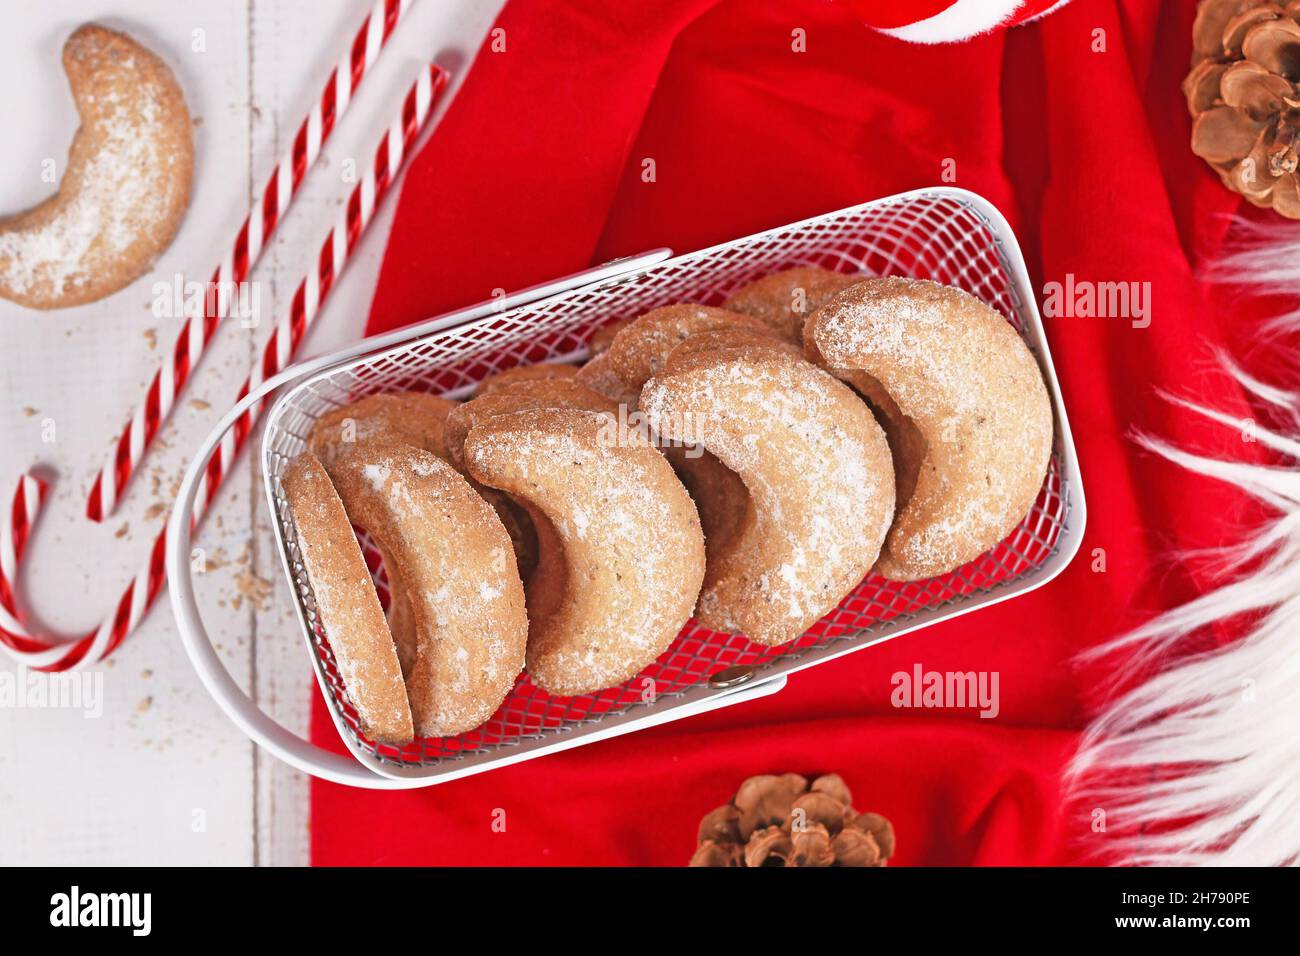 Top View Of Cescent Christmas Cookies Called Vanillekipferl A Traditional Austrian Or German Christmas Biscuits With Nuts And Icing Sugar Stock Photo Alamy